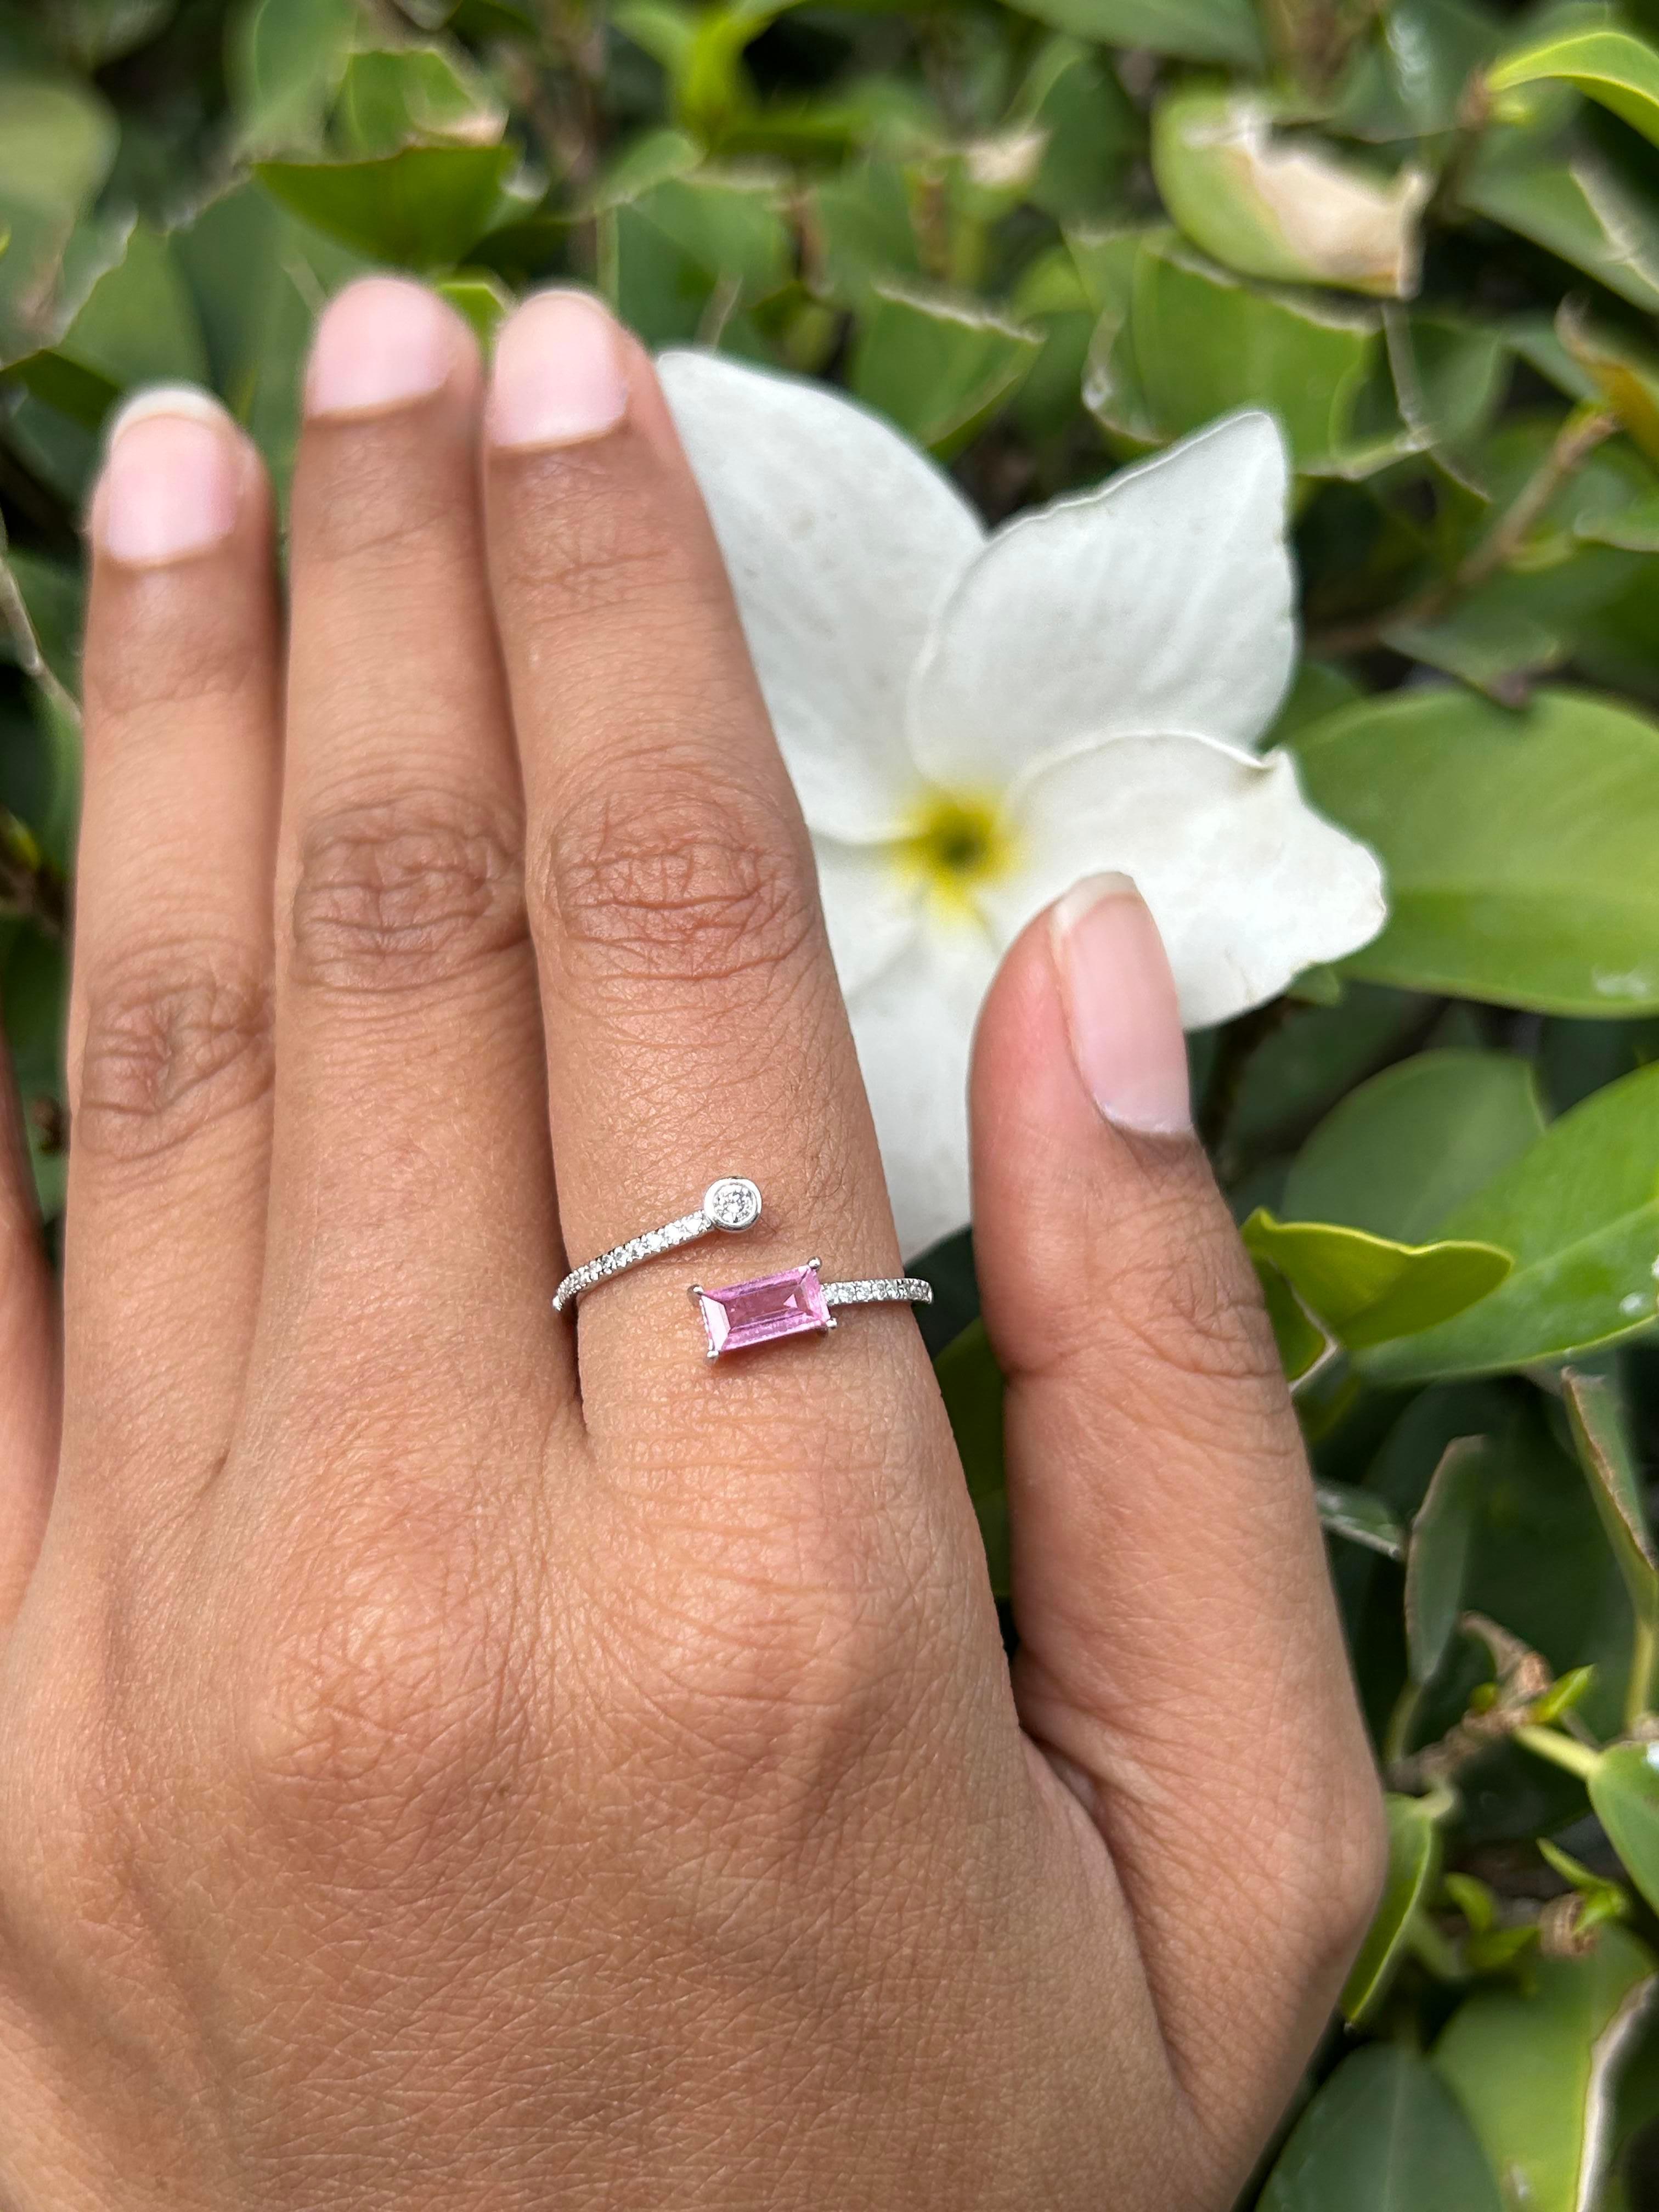 For Sale:  Minimalist Open Ended Ring with Baguette Cut Pink Sapphire and Diamond 9